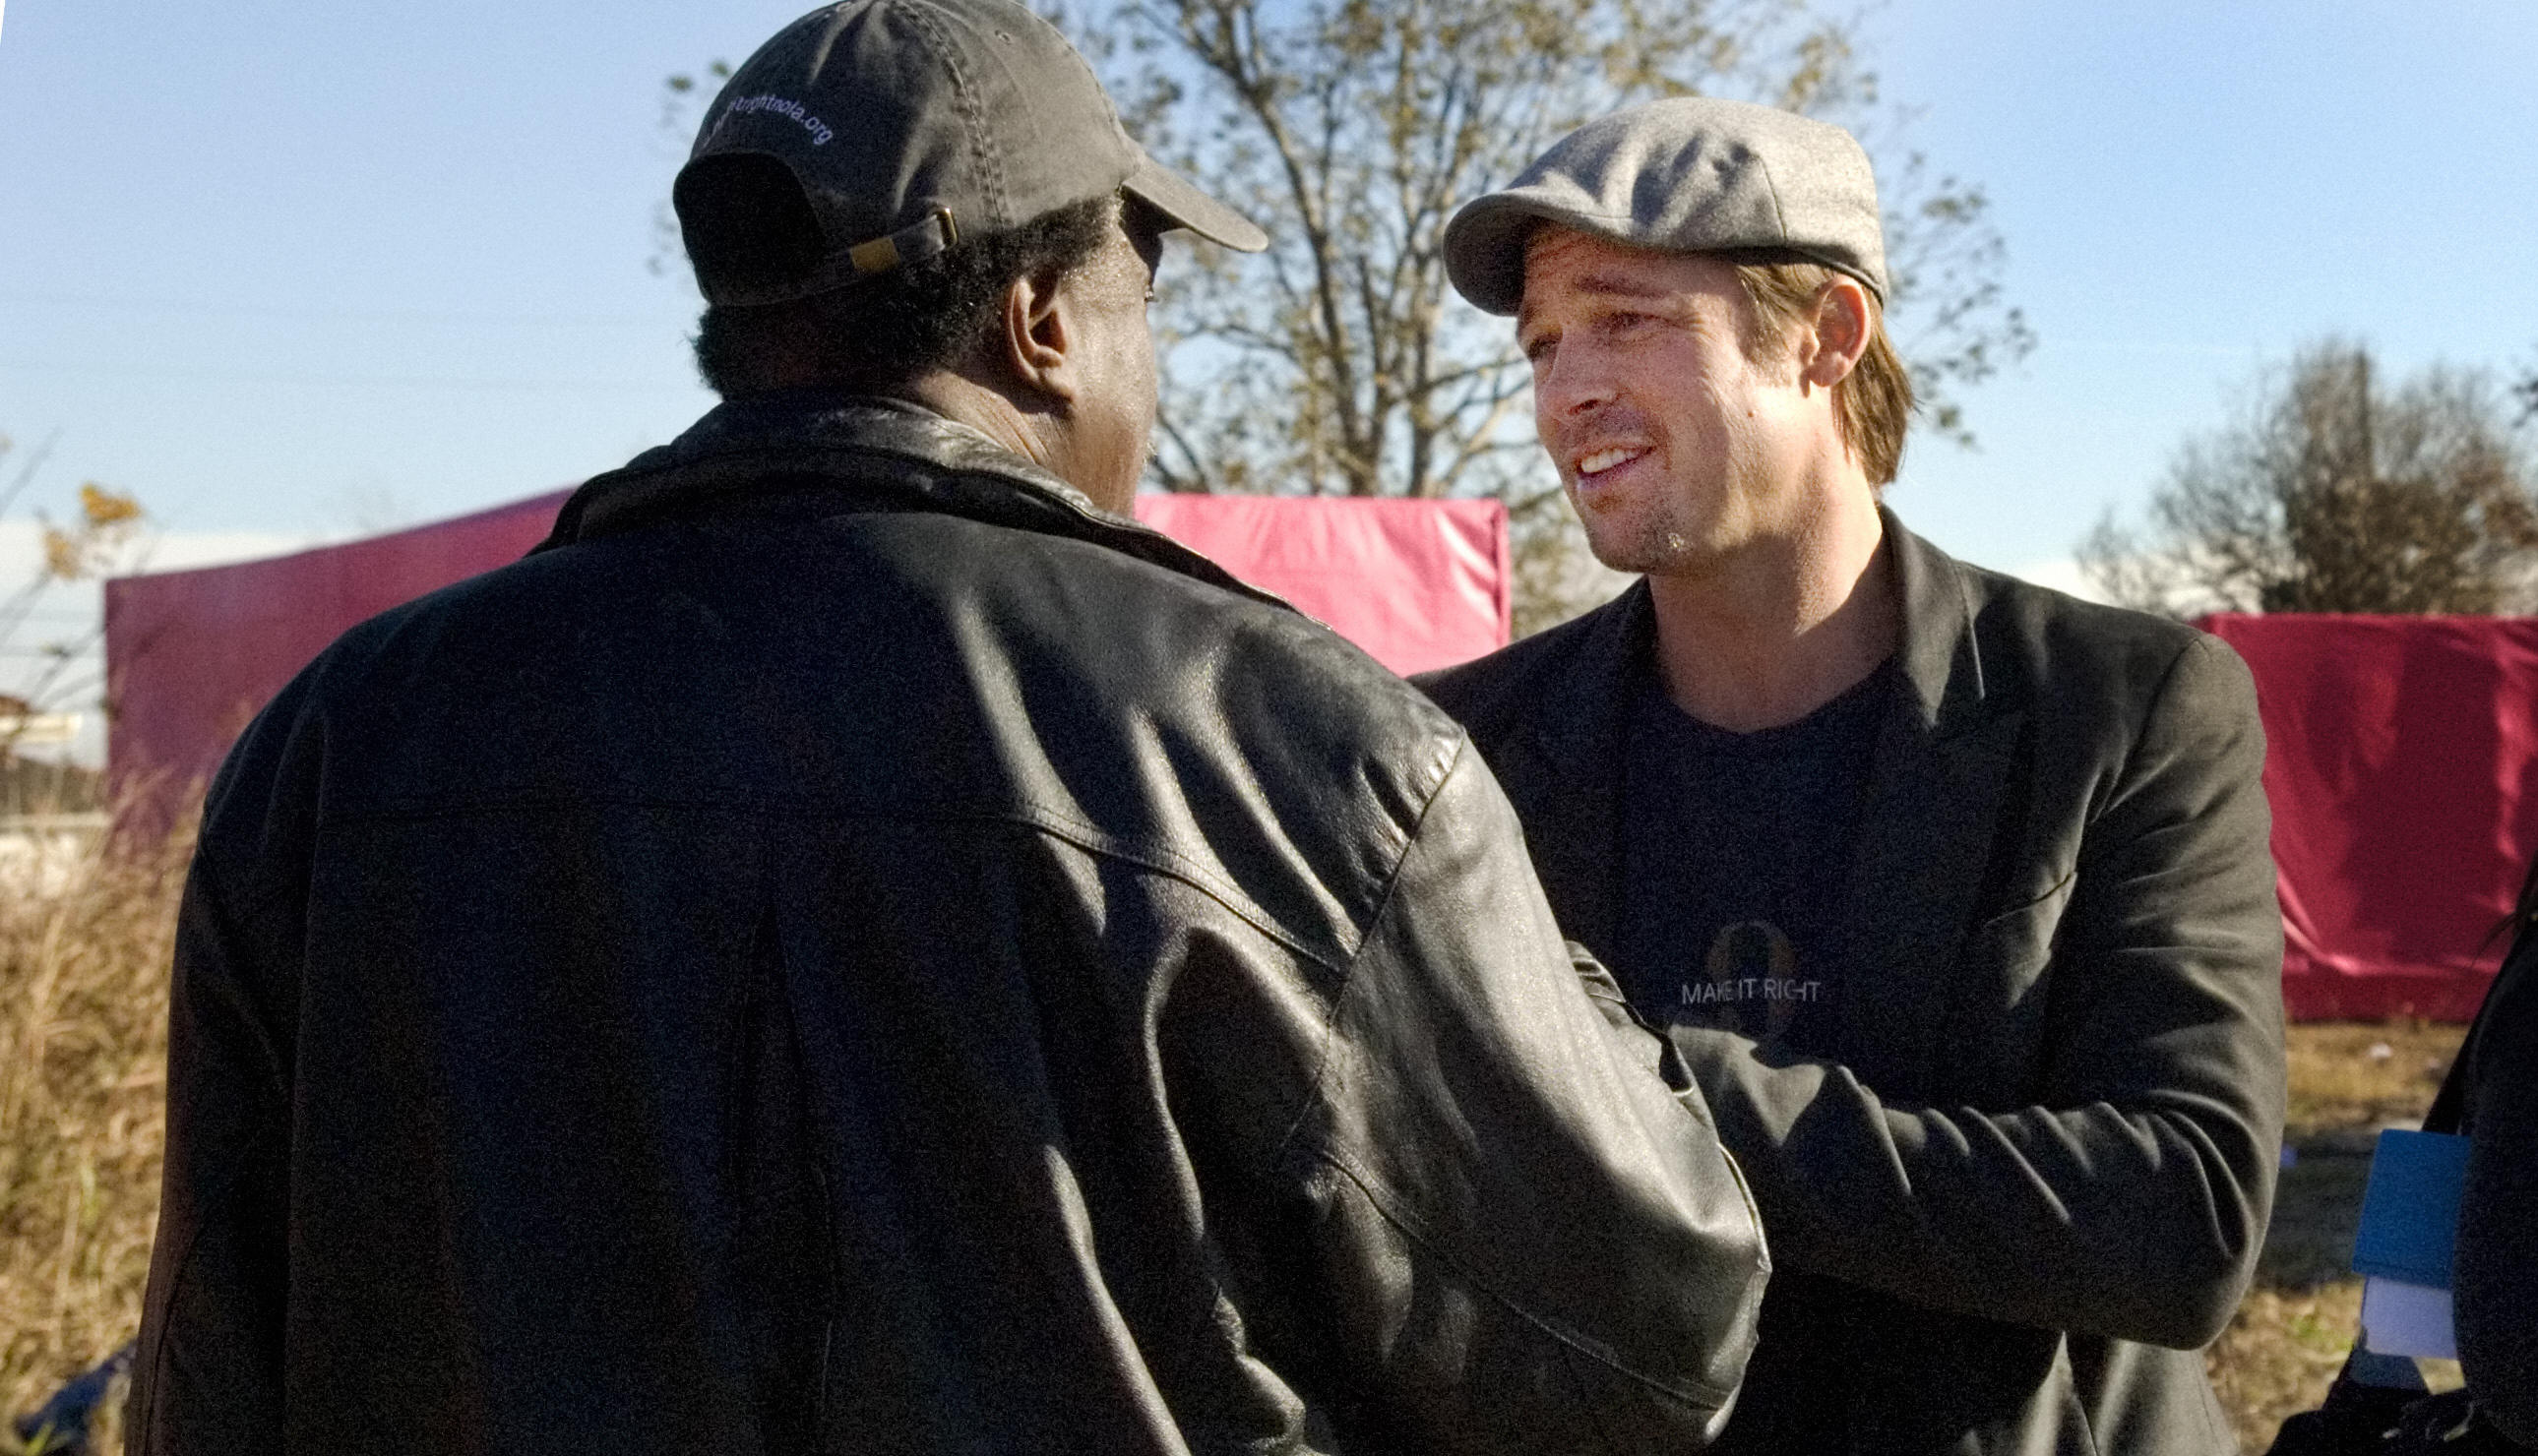 Brad Pitt and Robert Green in New Orleans, 2007 | Source: Getty Images